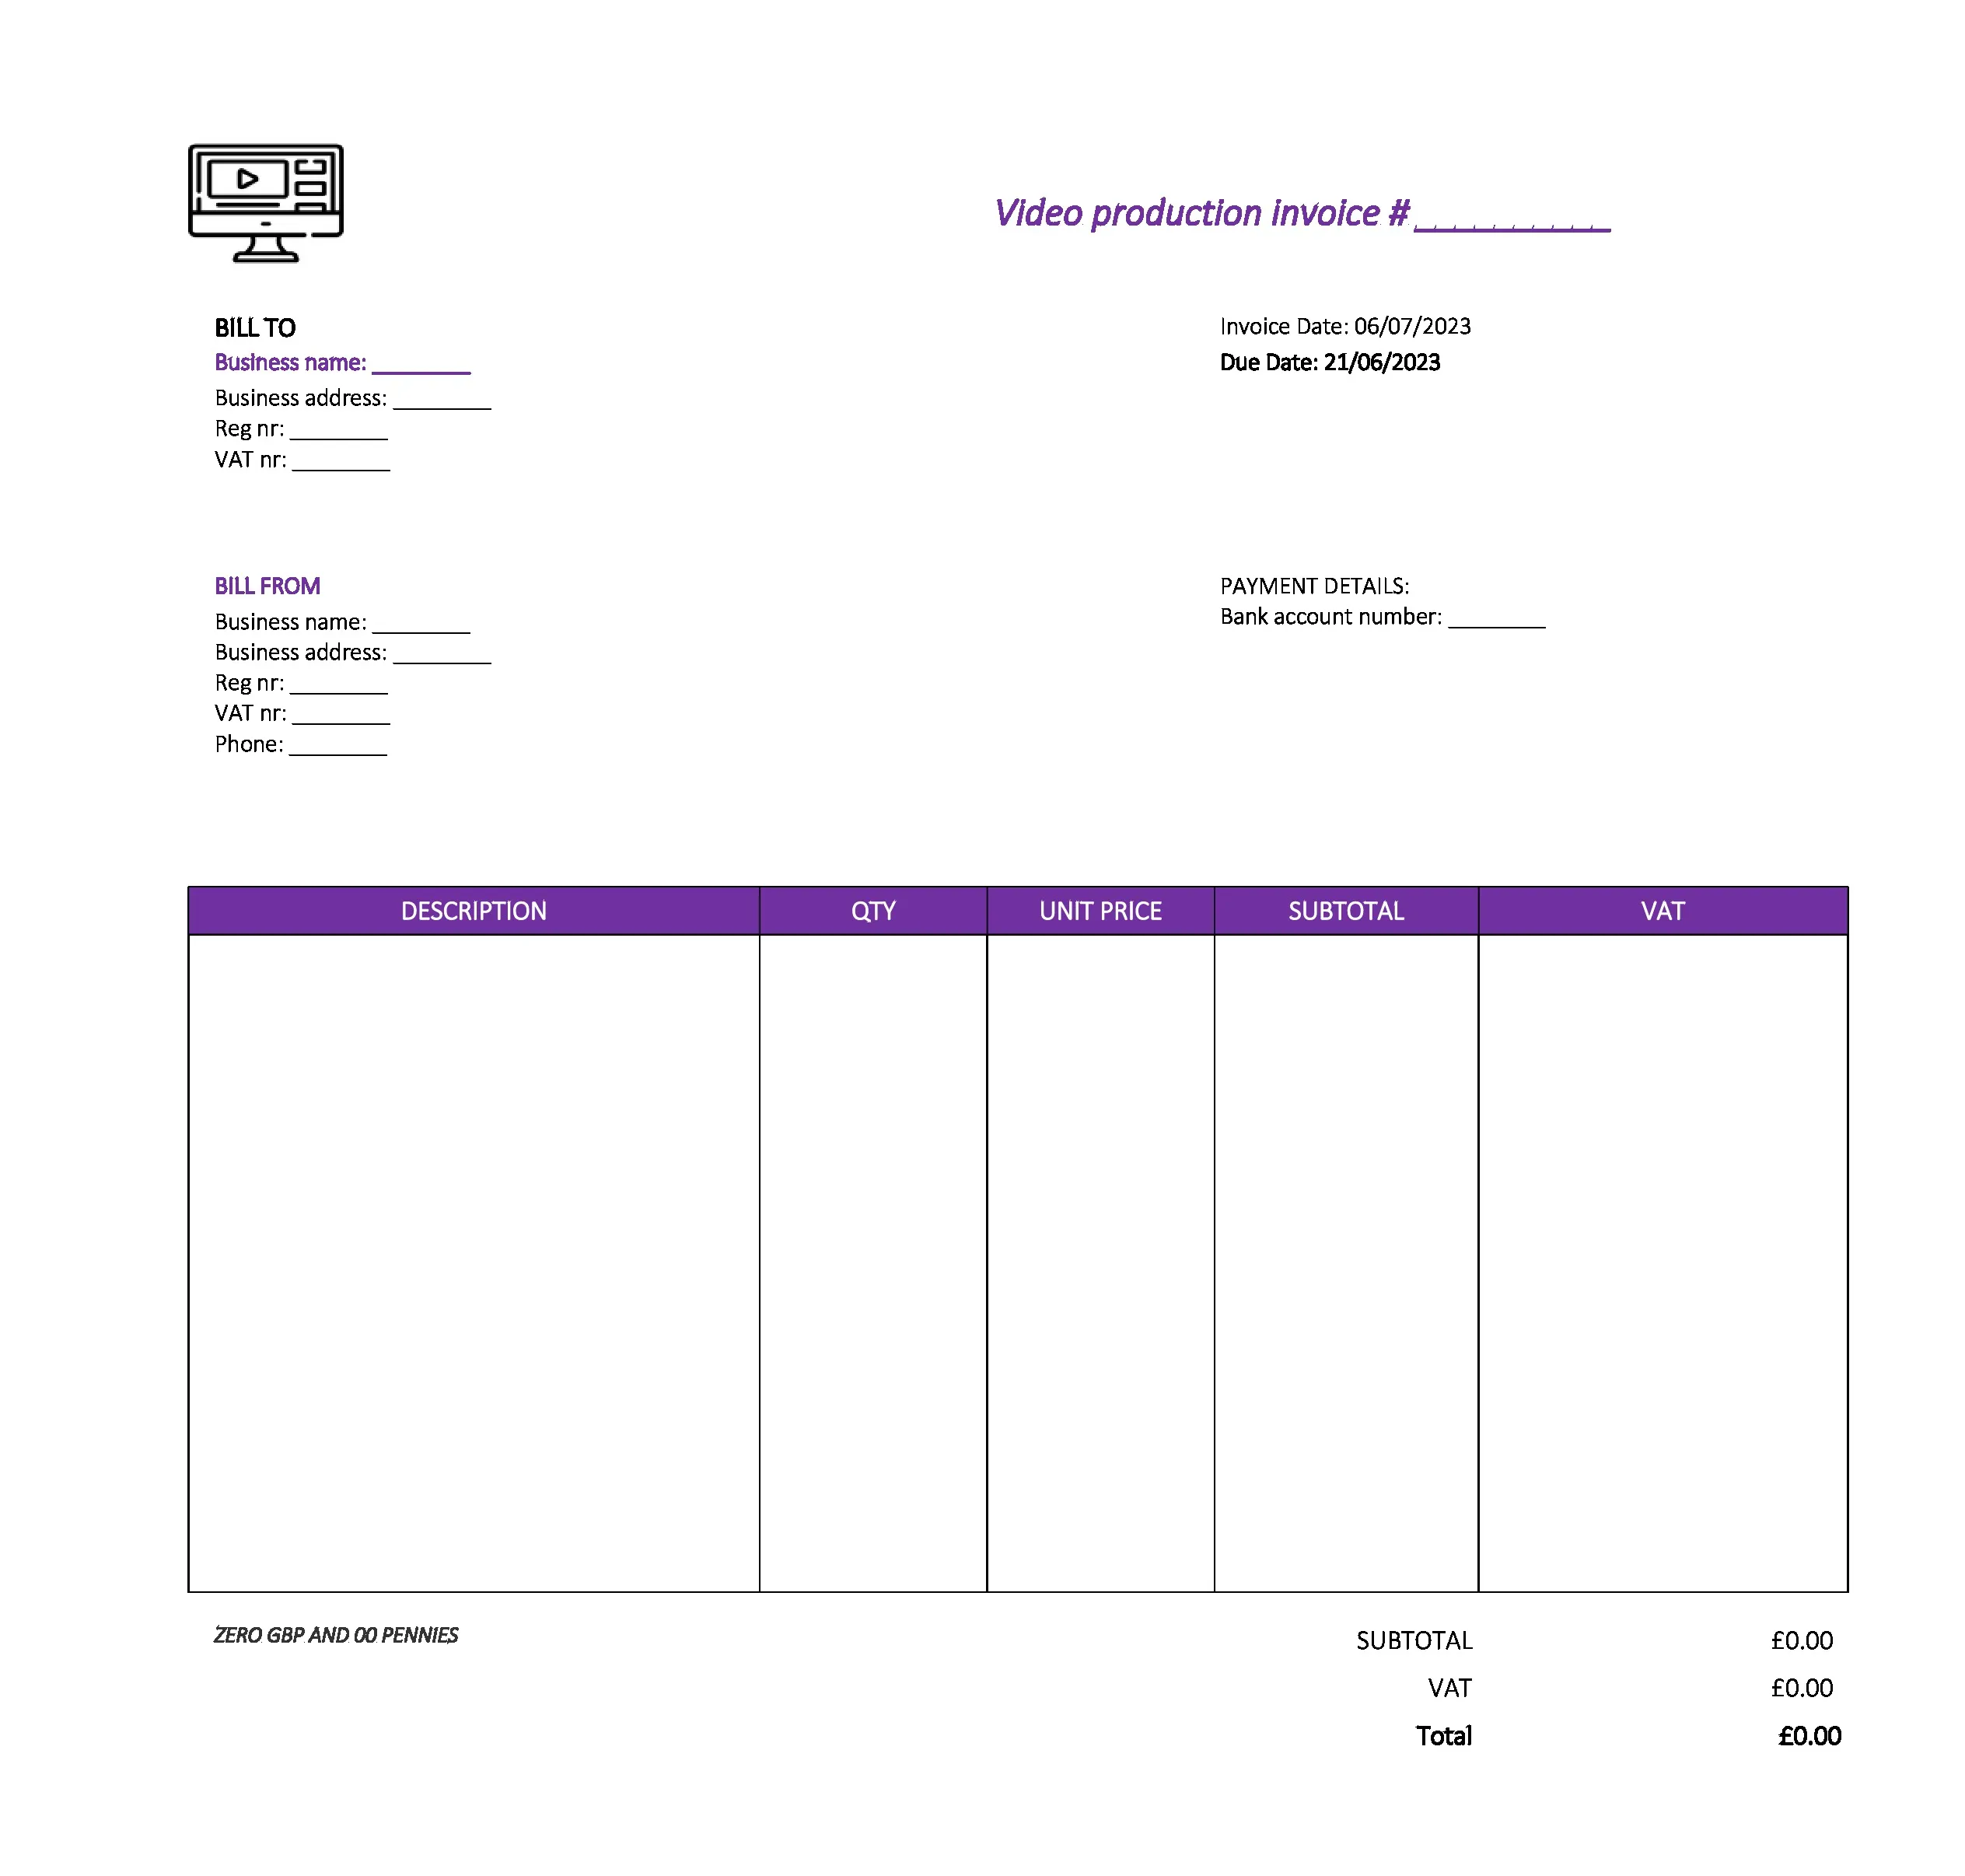 cool video production invoice template UK Excel / Google sheets